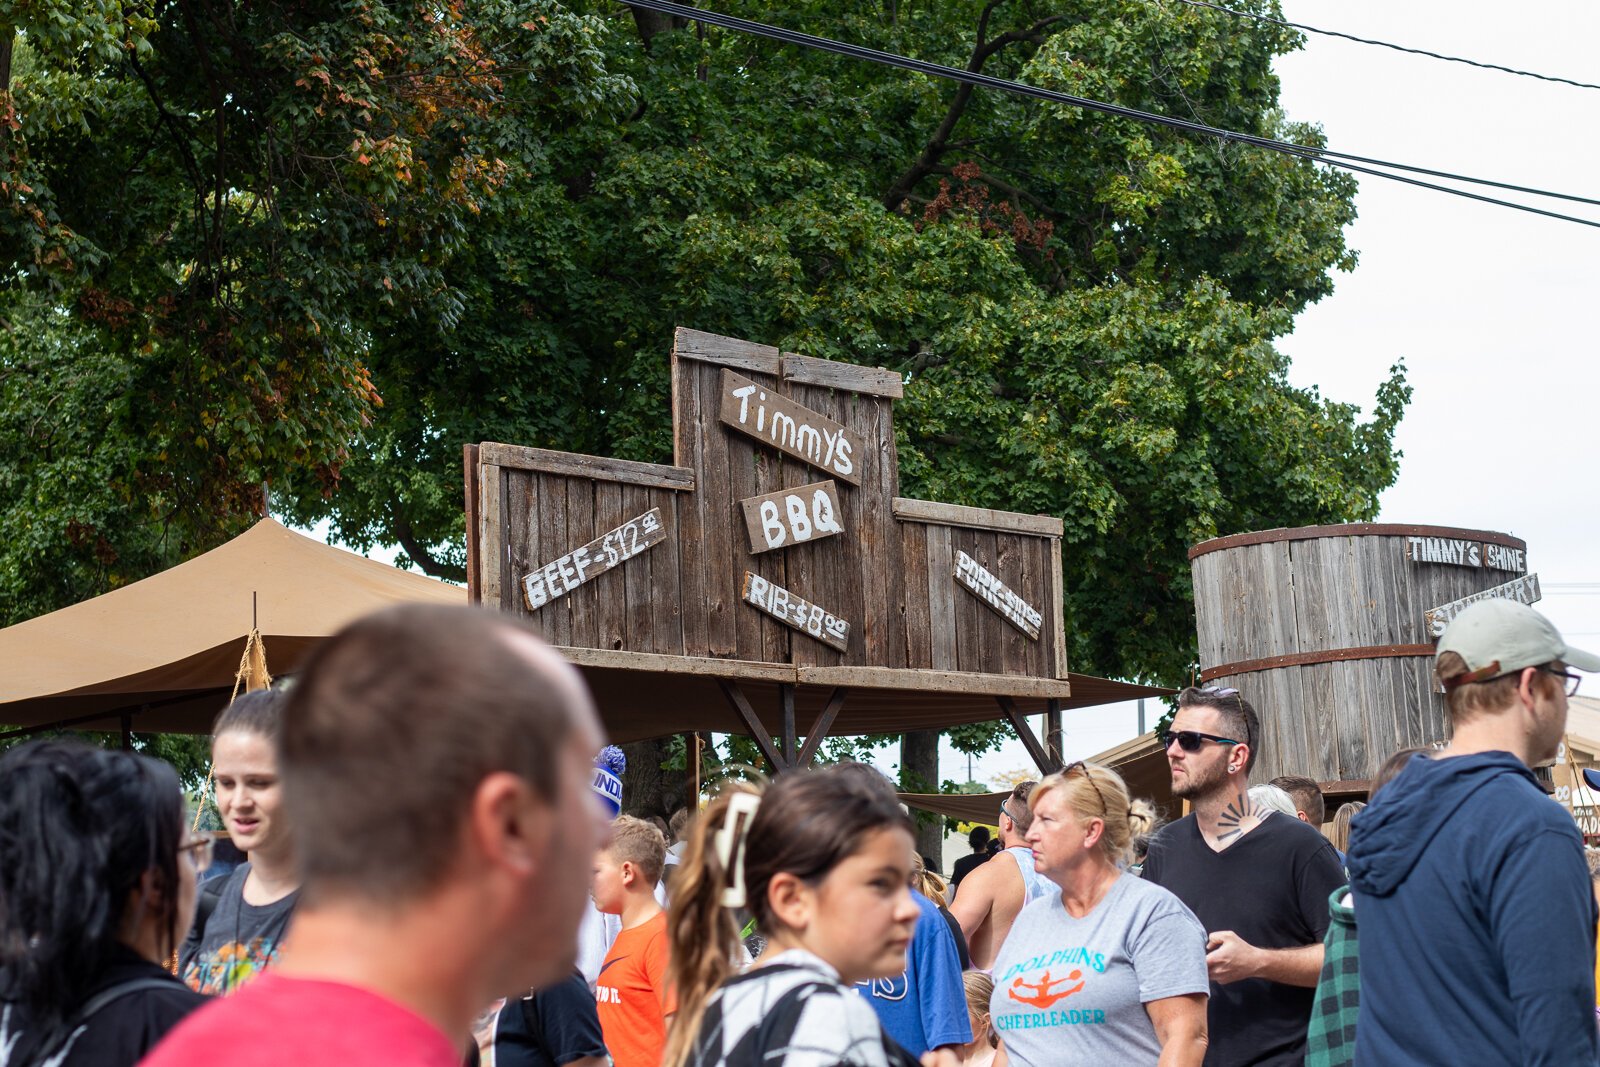 Festival-goers find their way through the crowded walkway.